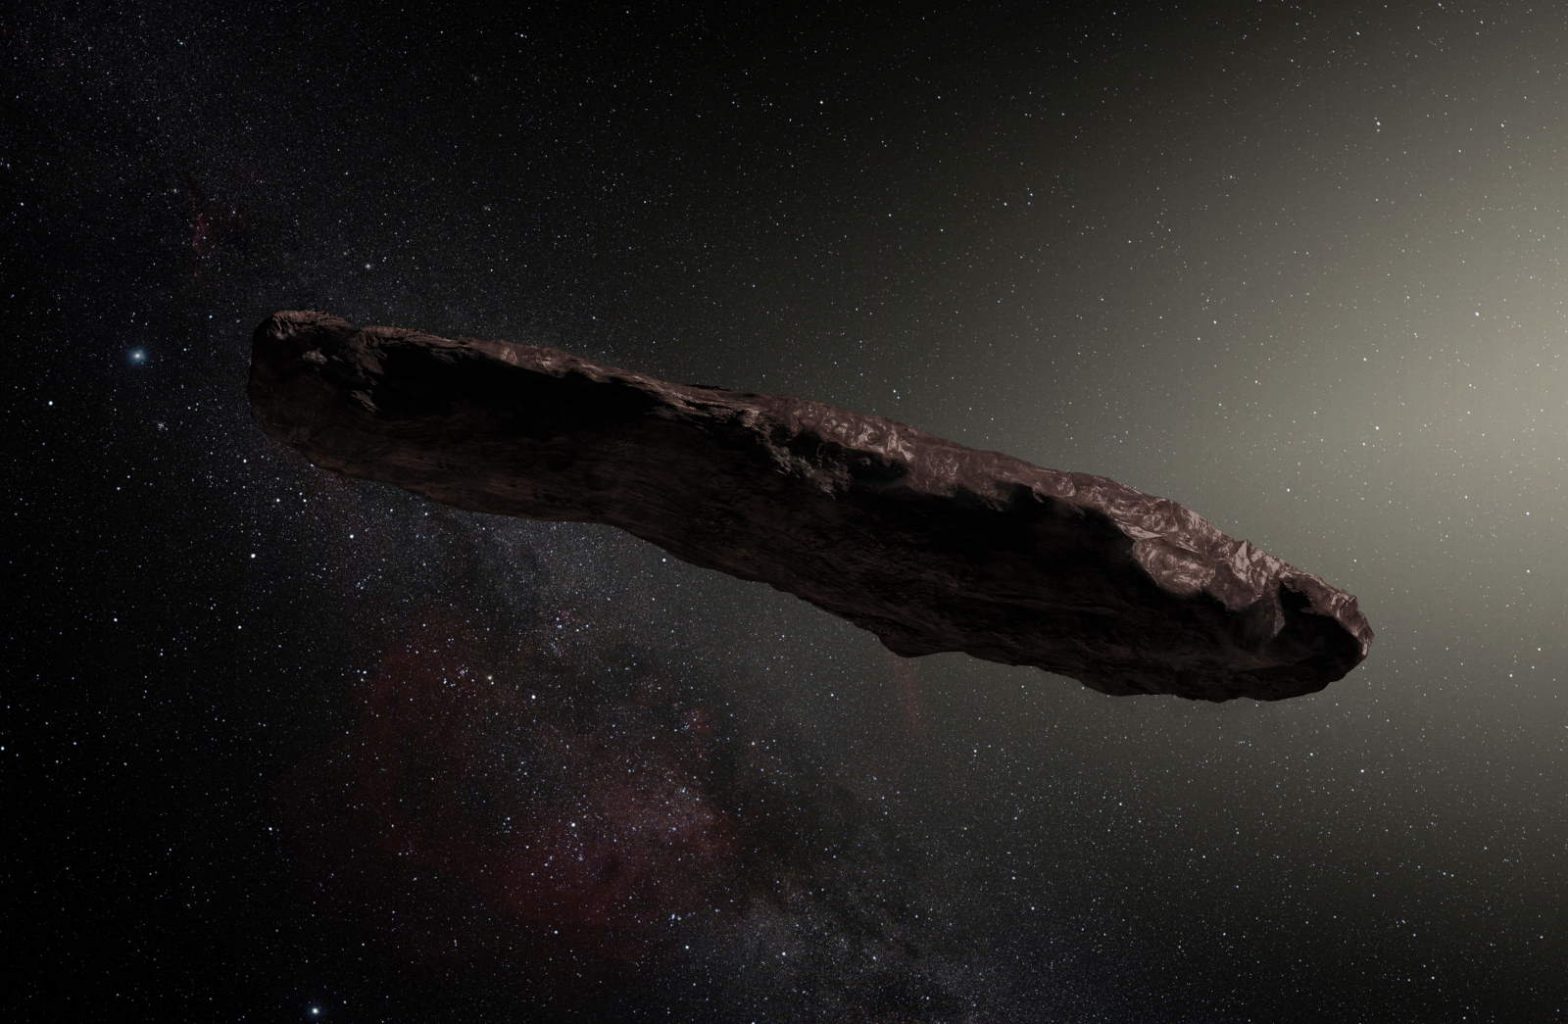 Oumuamua - an alien spaceship? Probably not.